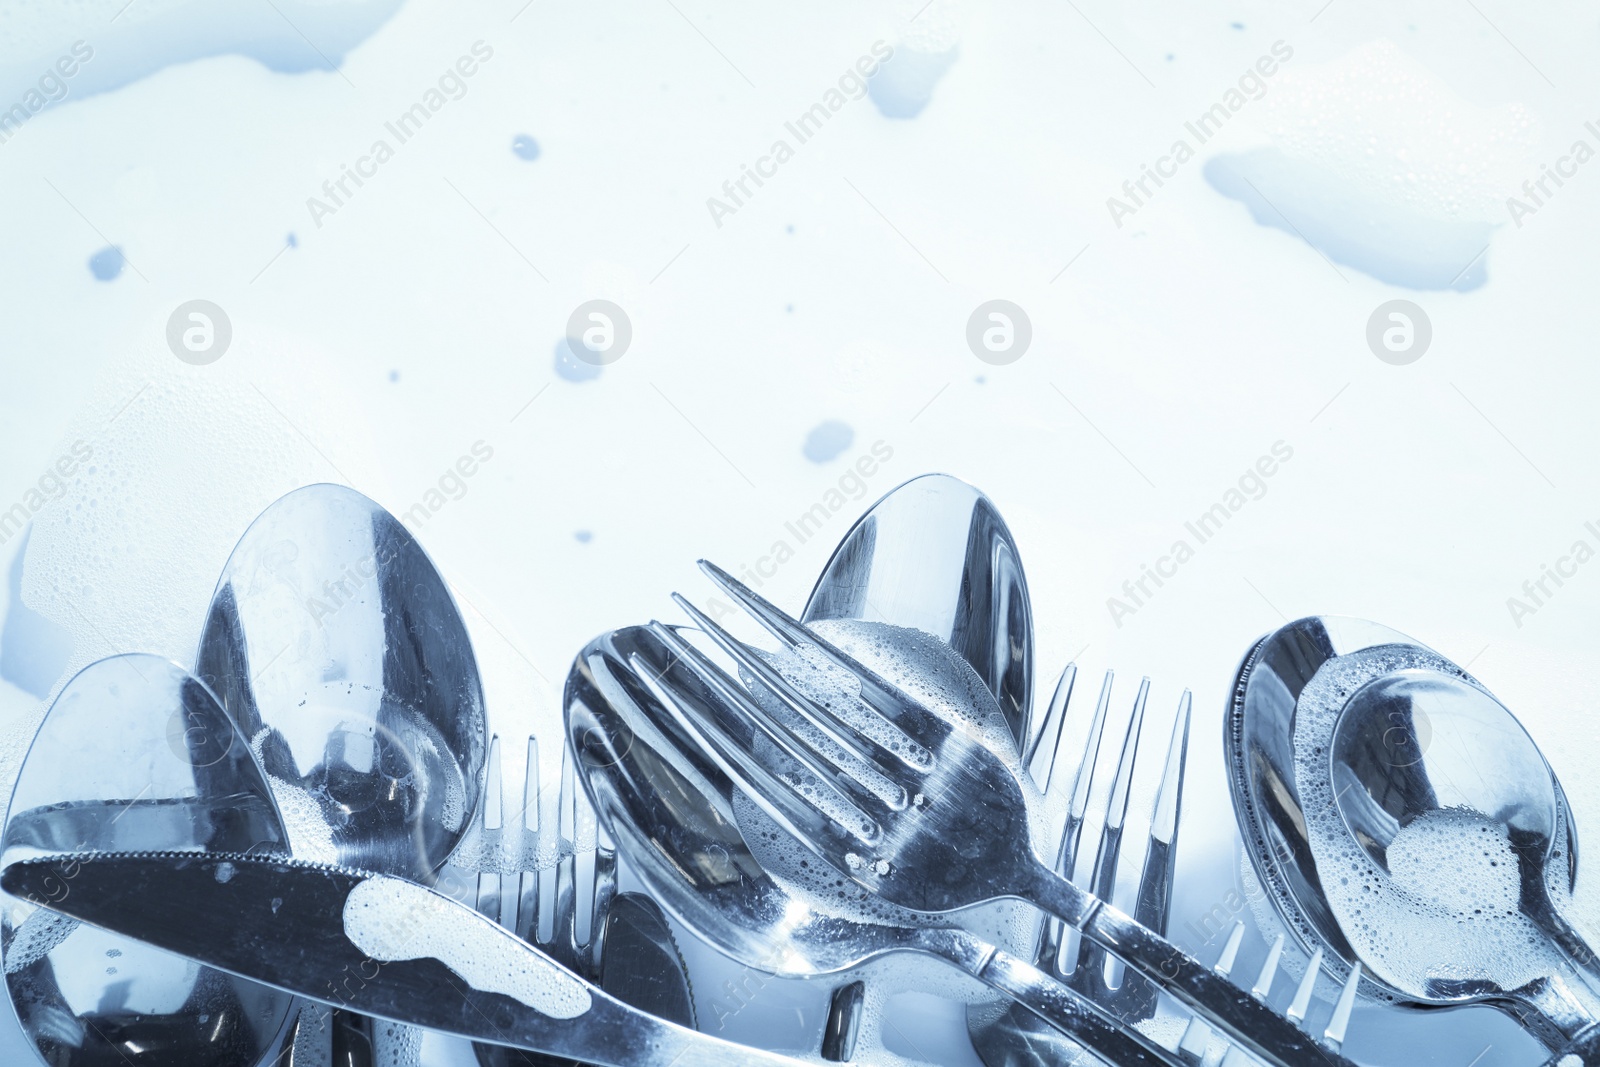 Photo of Different silverware in foam, flat lay with space for text. Toned in blue